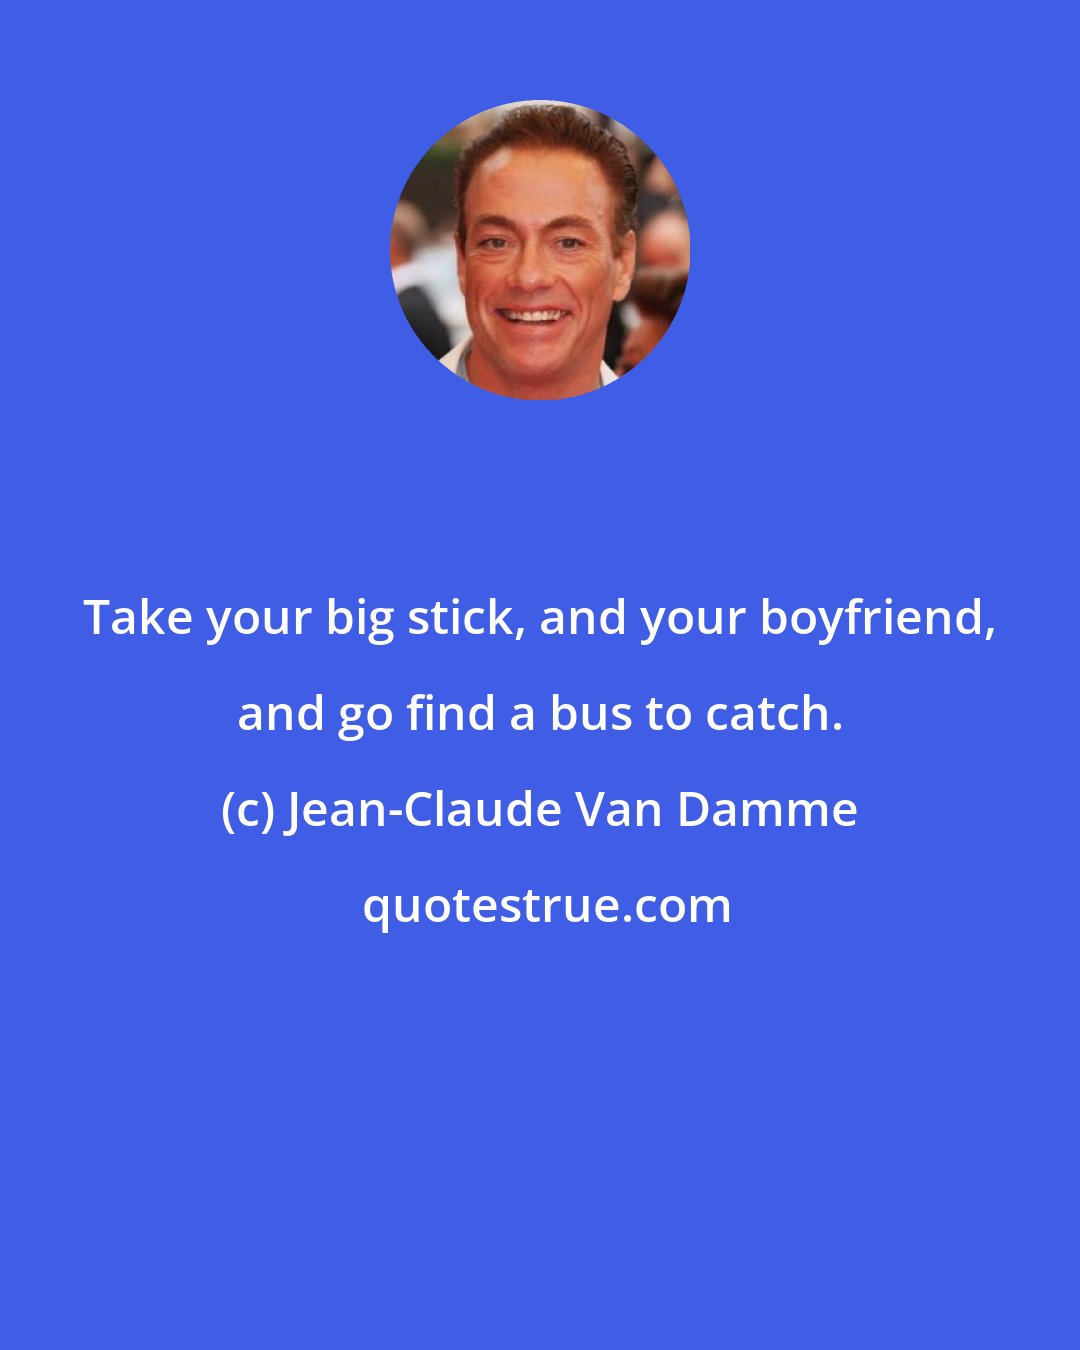 Jean-Claude Van Damme: Take your big stick, and your boyfriend, and go find a bus to catch.